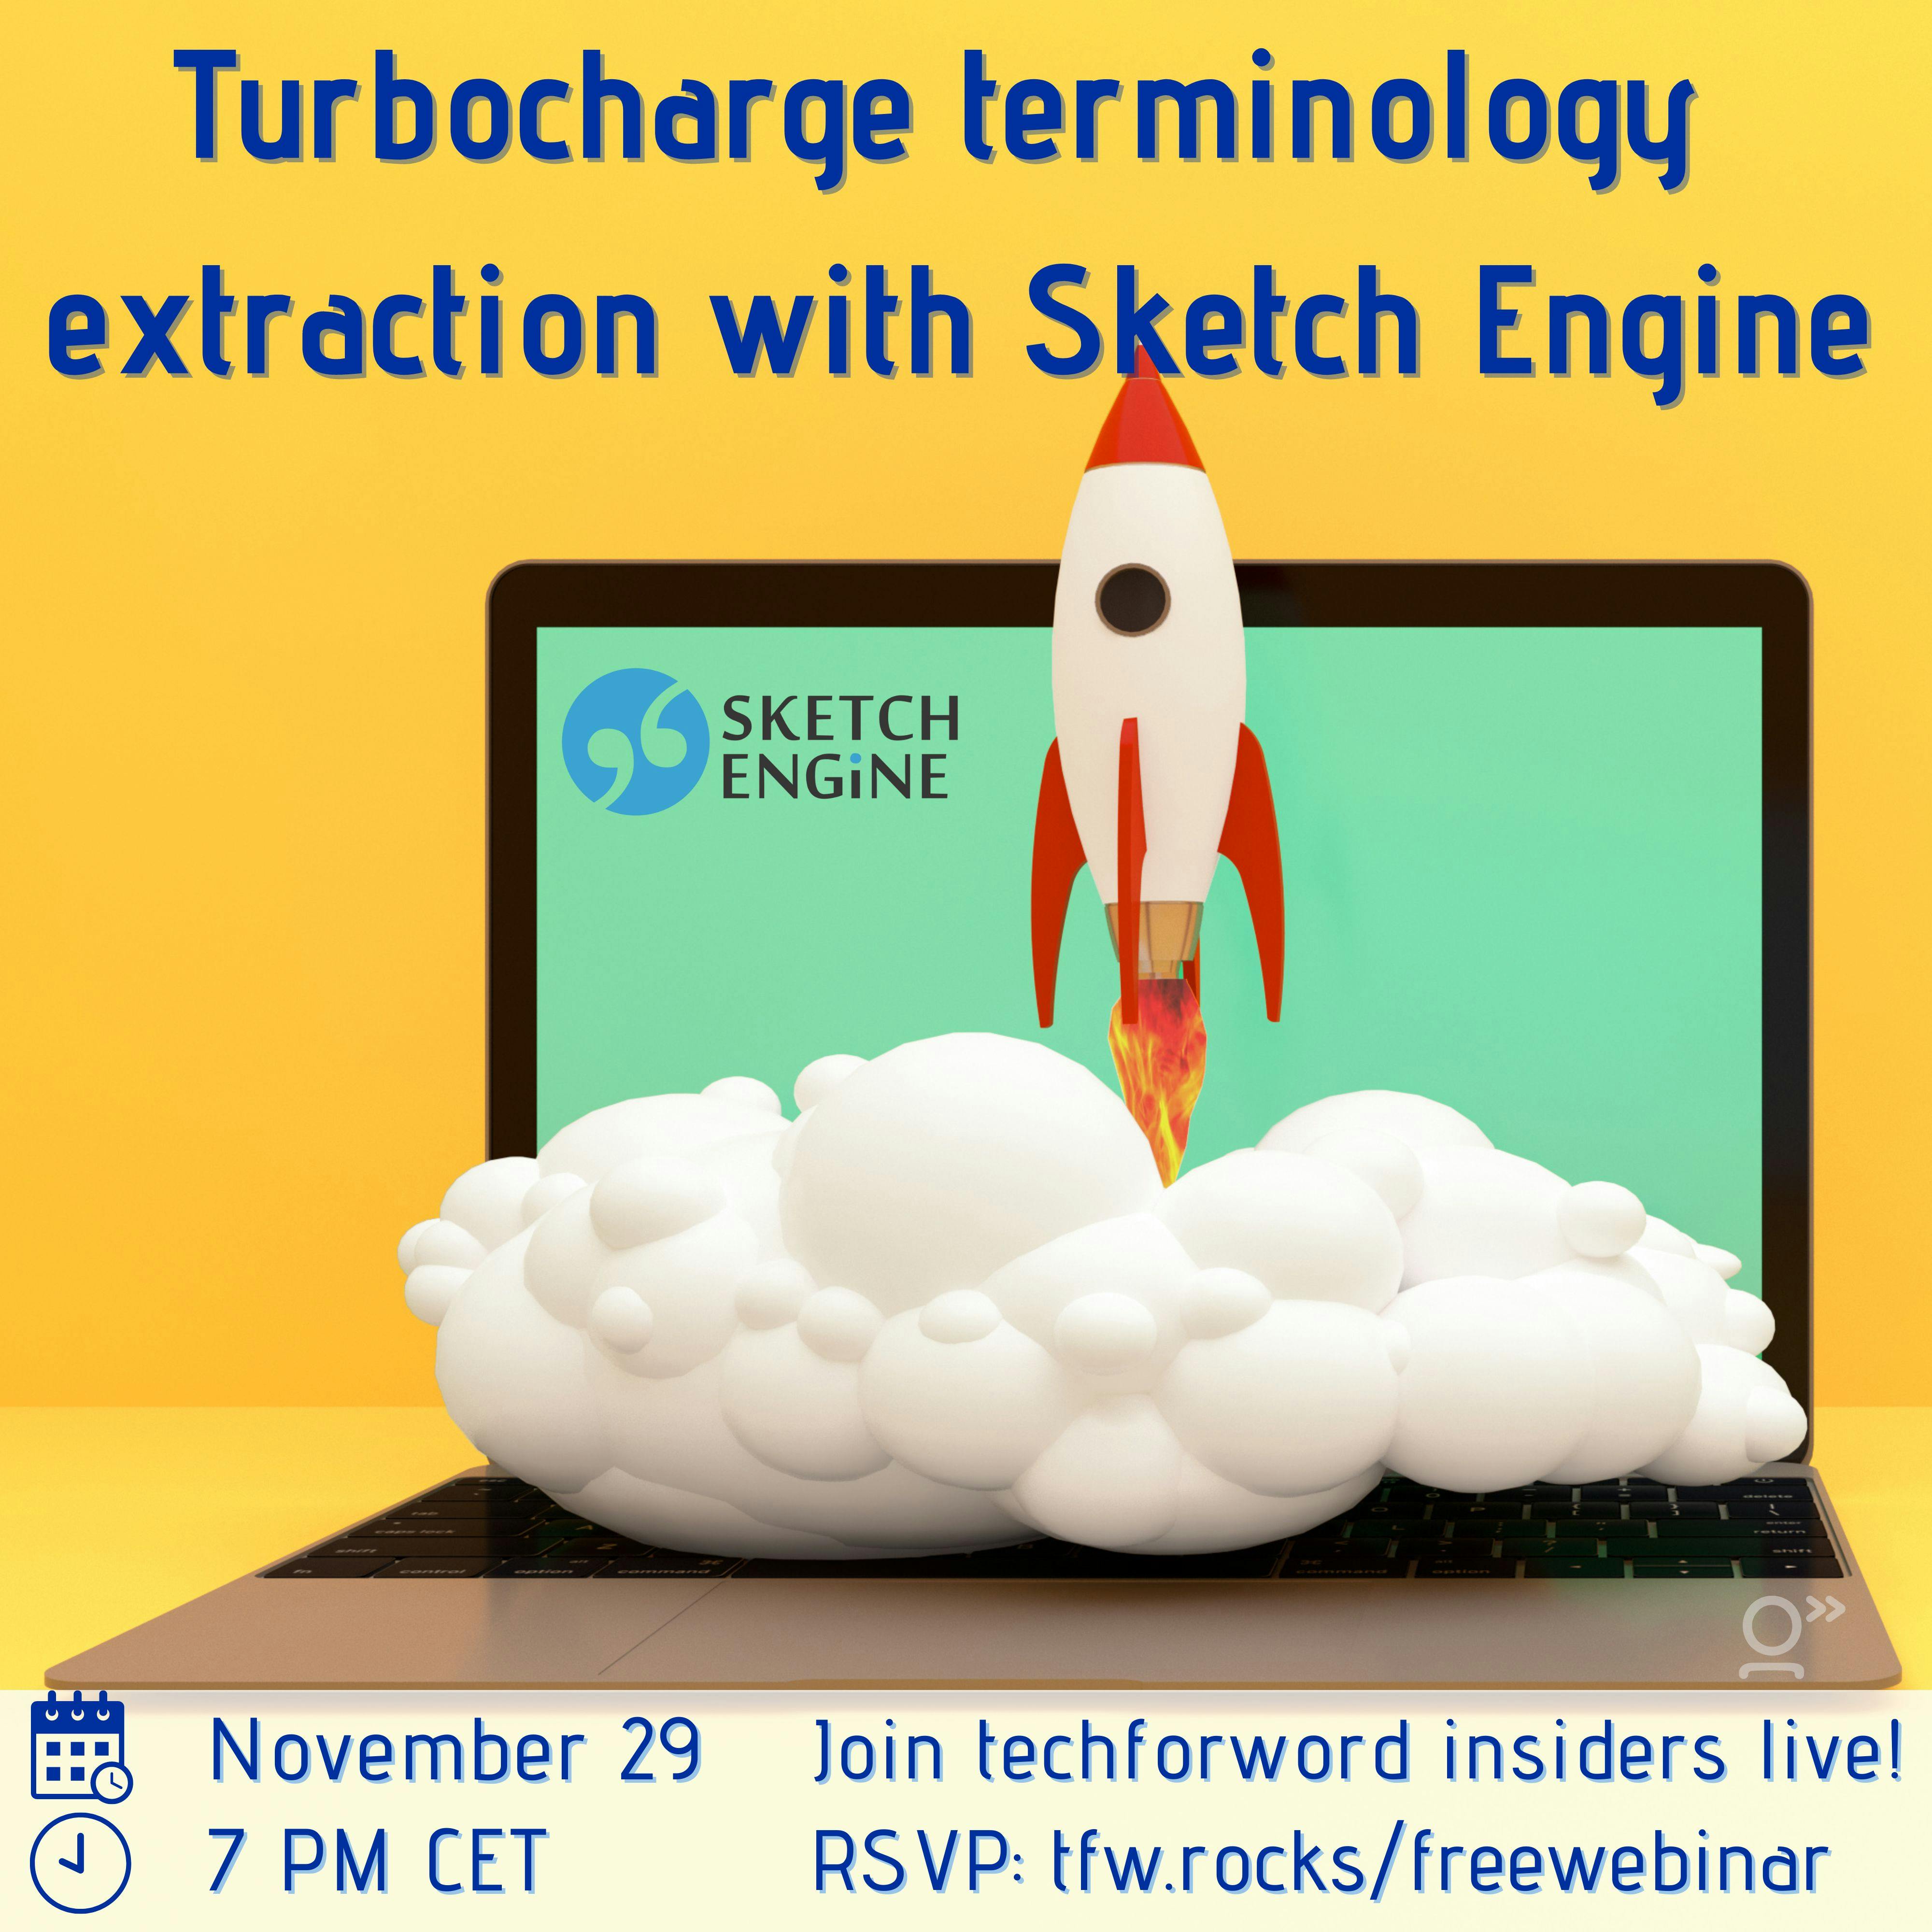 Image: yellow gradient background, dark blue title that reads Turbocharge terminology extraction with Sketch Engine. Open laptop with green screen and Sketch Engine logo in top left corner. Keyboard covered by a floating cloud created by a launching rocket. At the bottom of the image, we have the event’s date which is November 29, 2022 at 7 PM CET. Join techforword insiders live, rsvp: twf.rocks/freewebinar